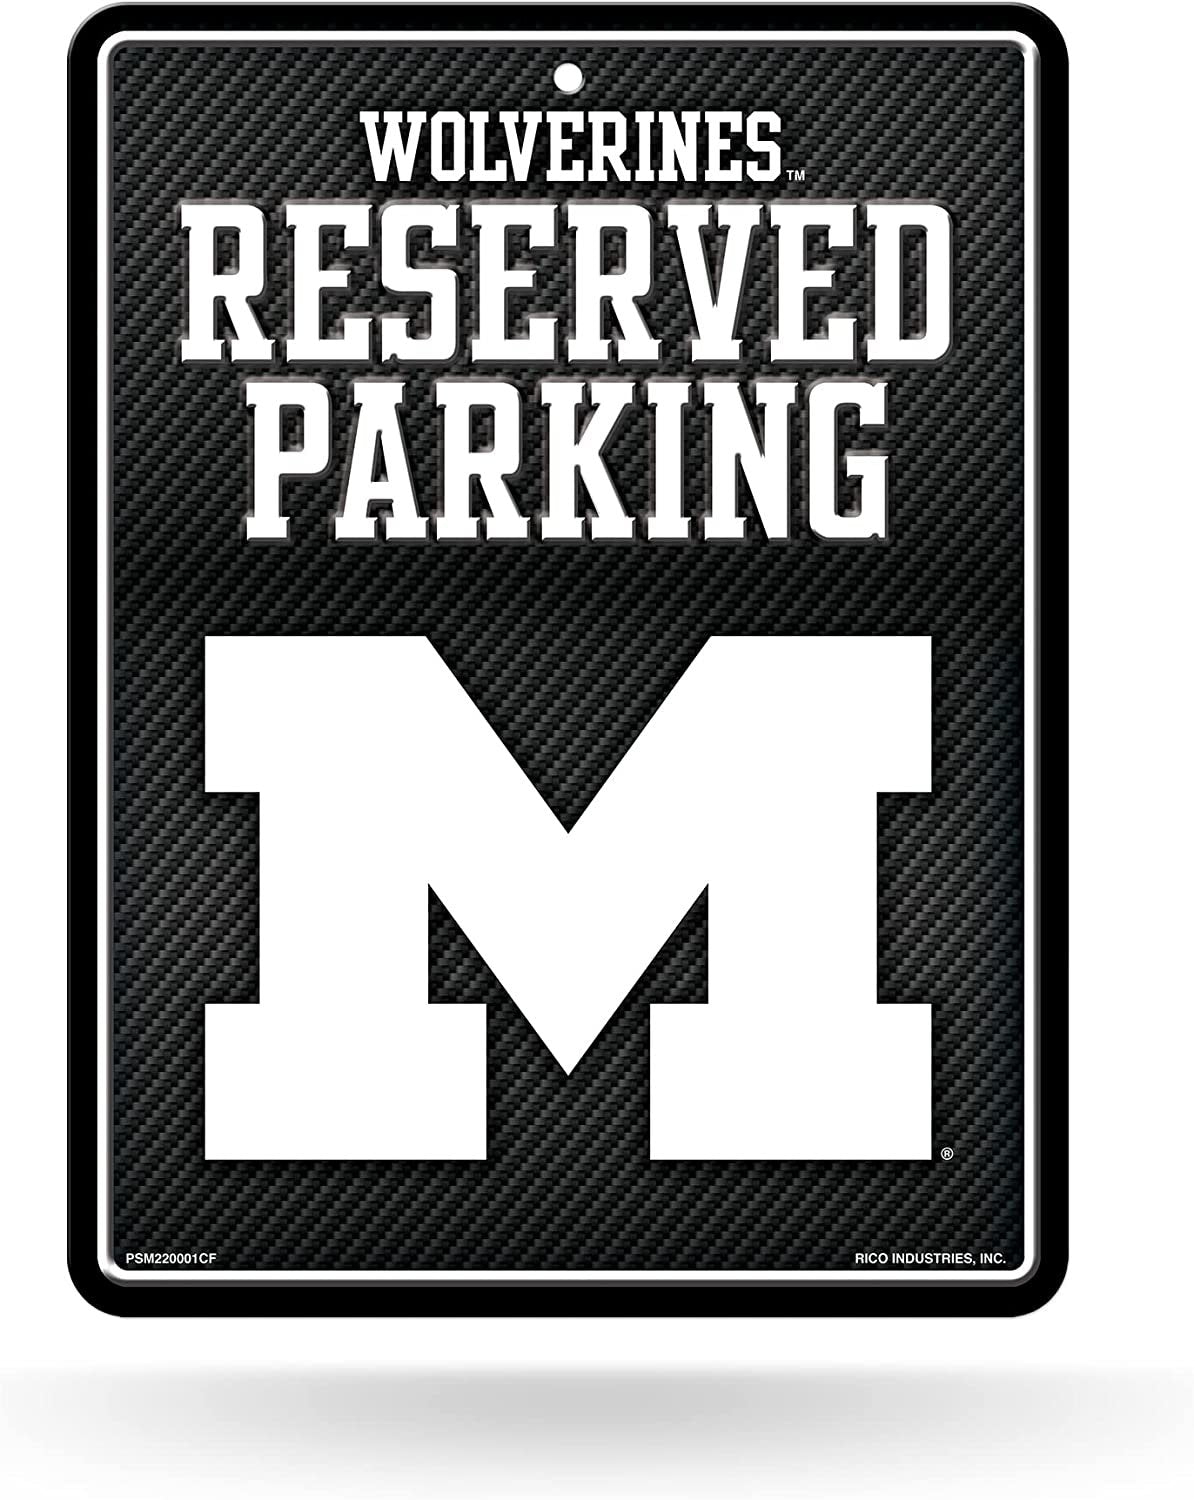 University of Michigan Wolverines Metal Parking Novelty Wall Sign 8.5 x 11 Inch Carbon Fiber Design